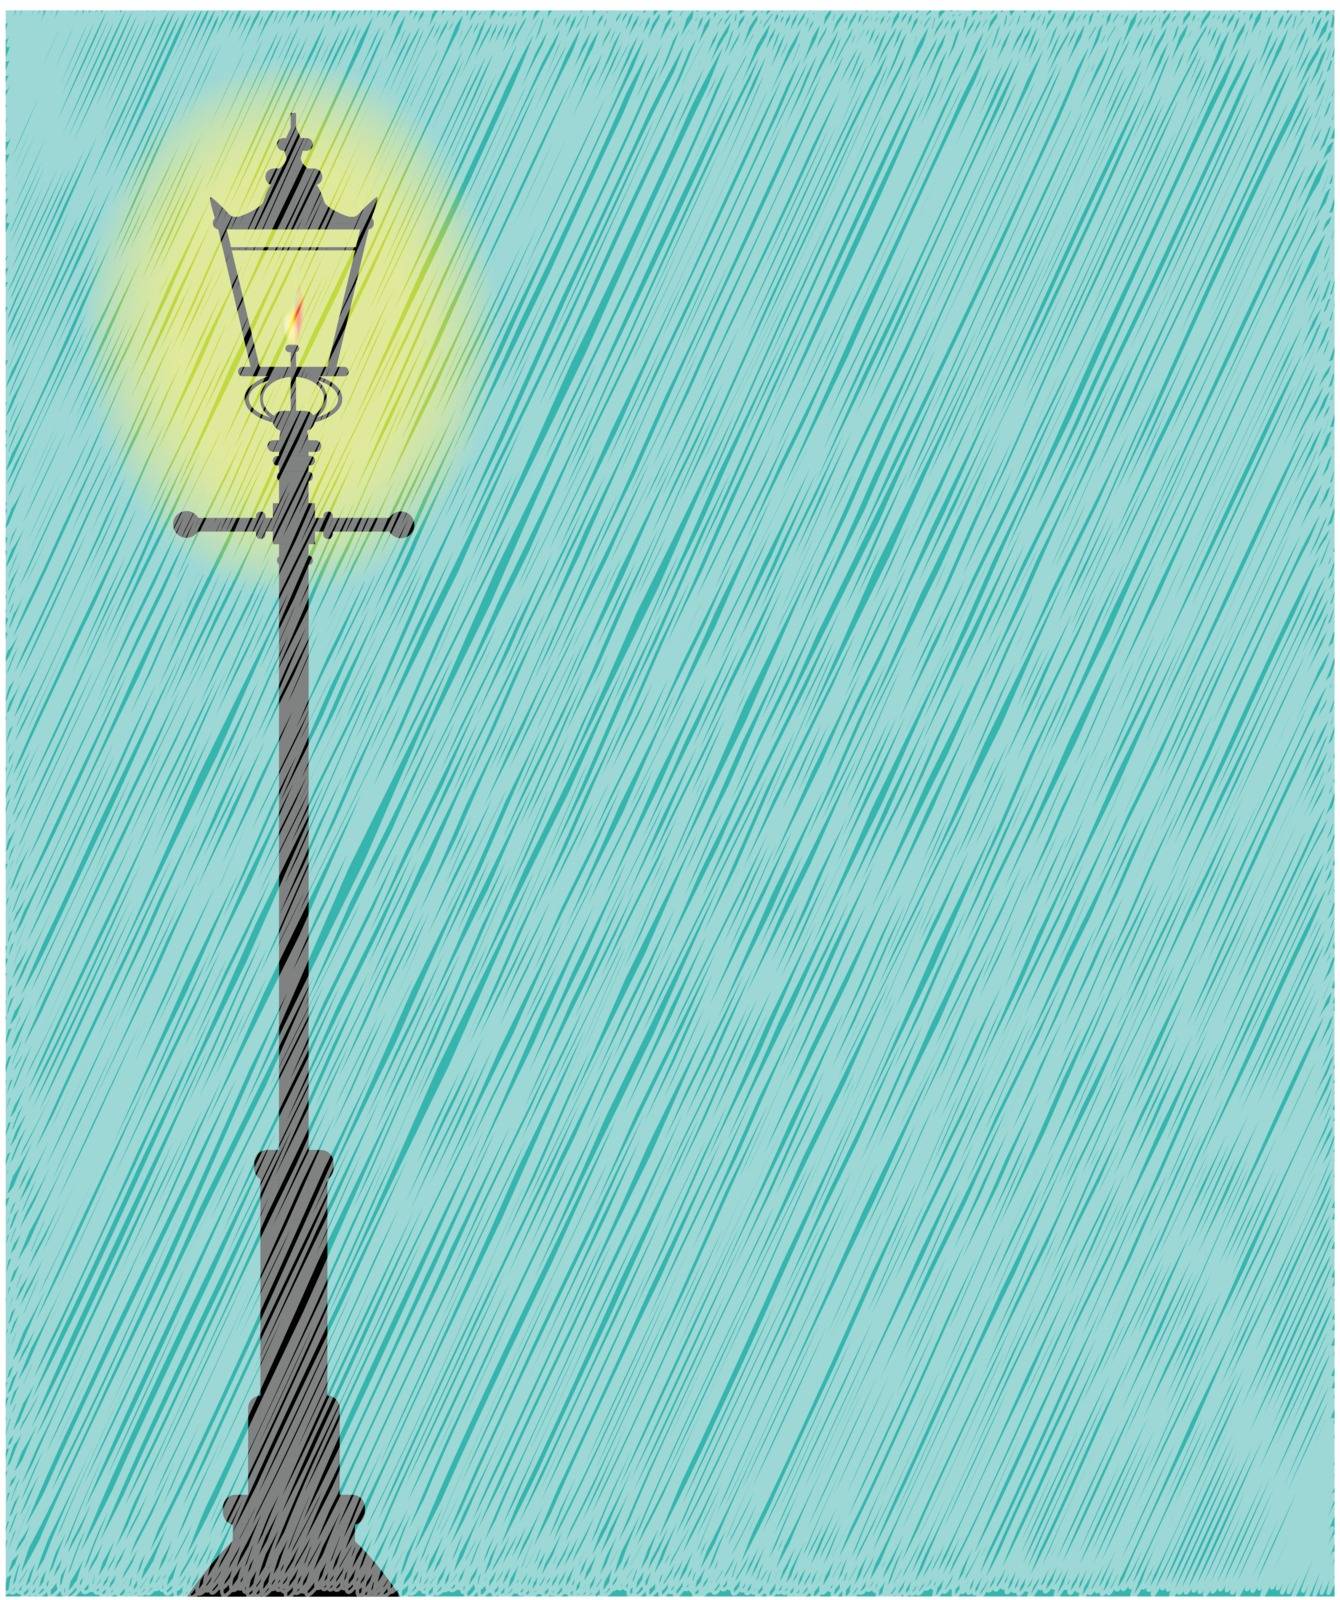 Lamppost In the Rain by Bigalbaloo